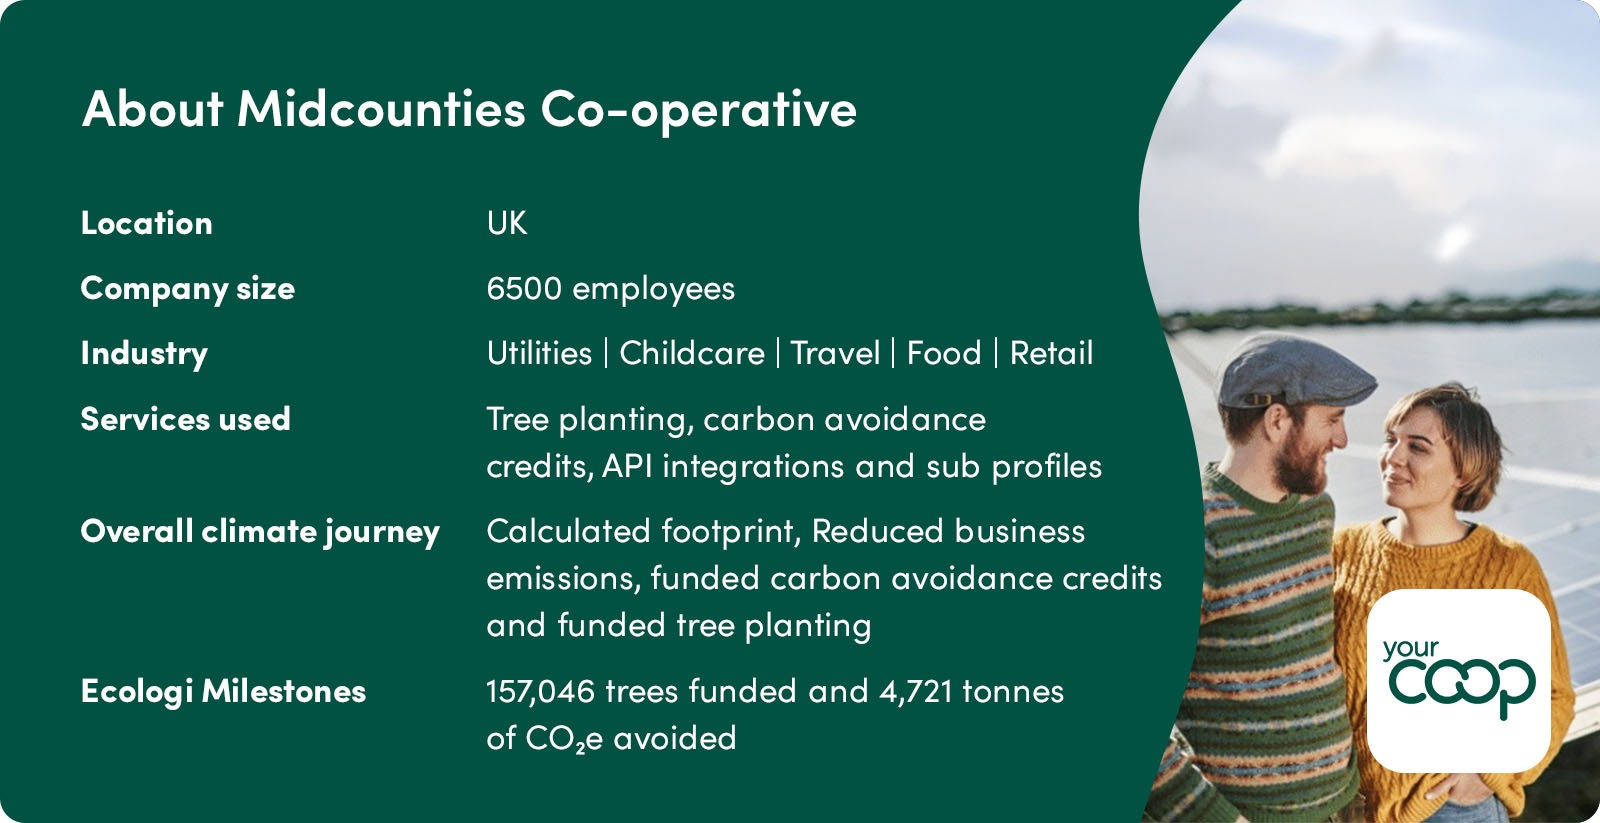 About Midcounties Co-operative